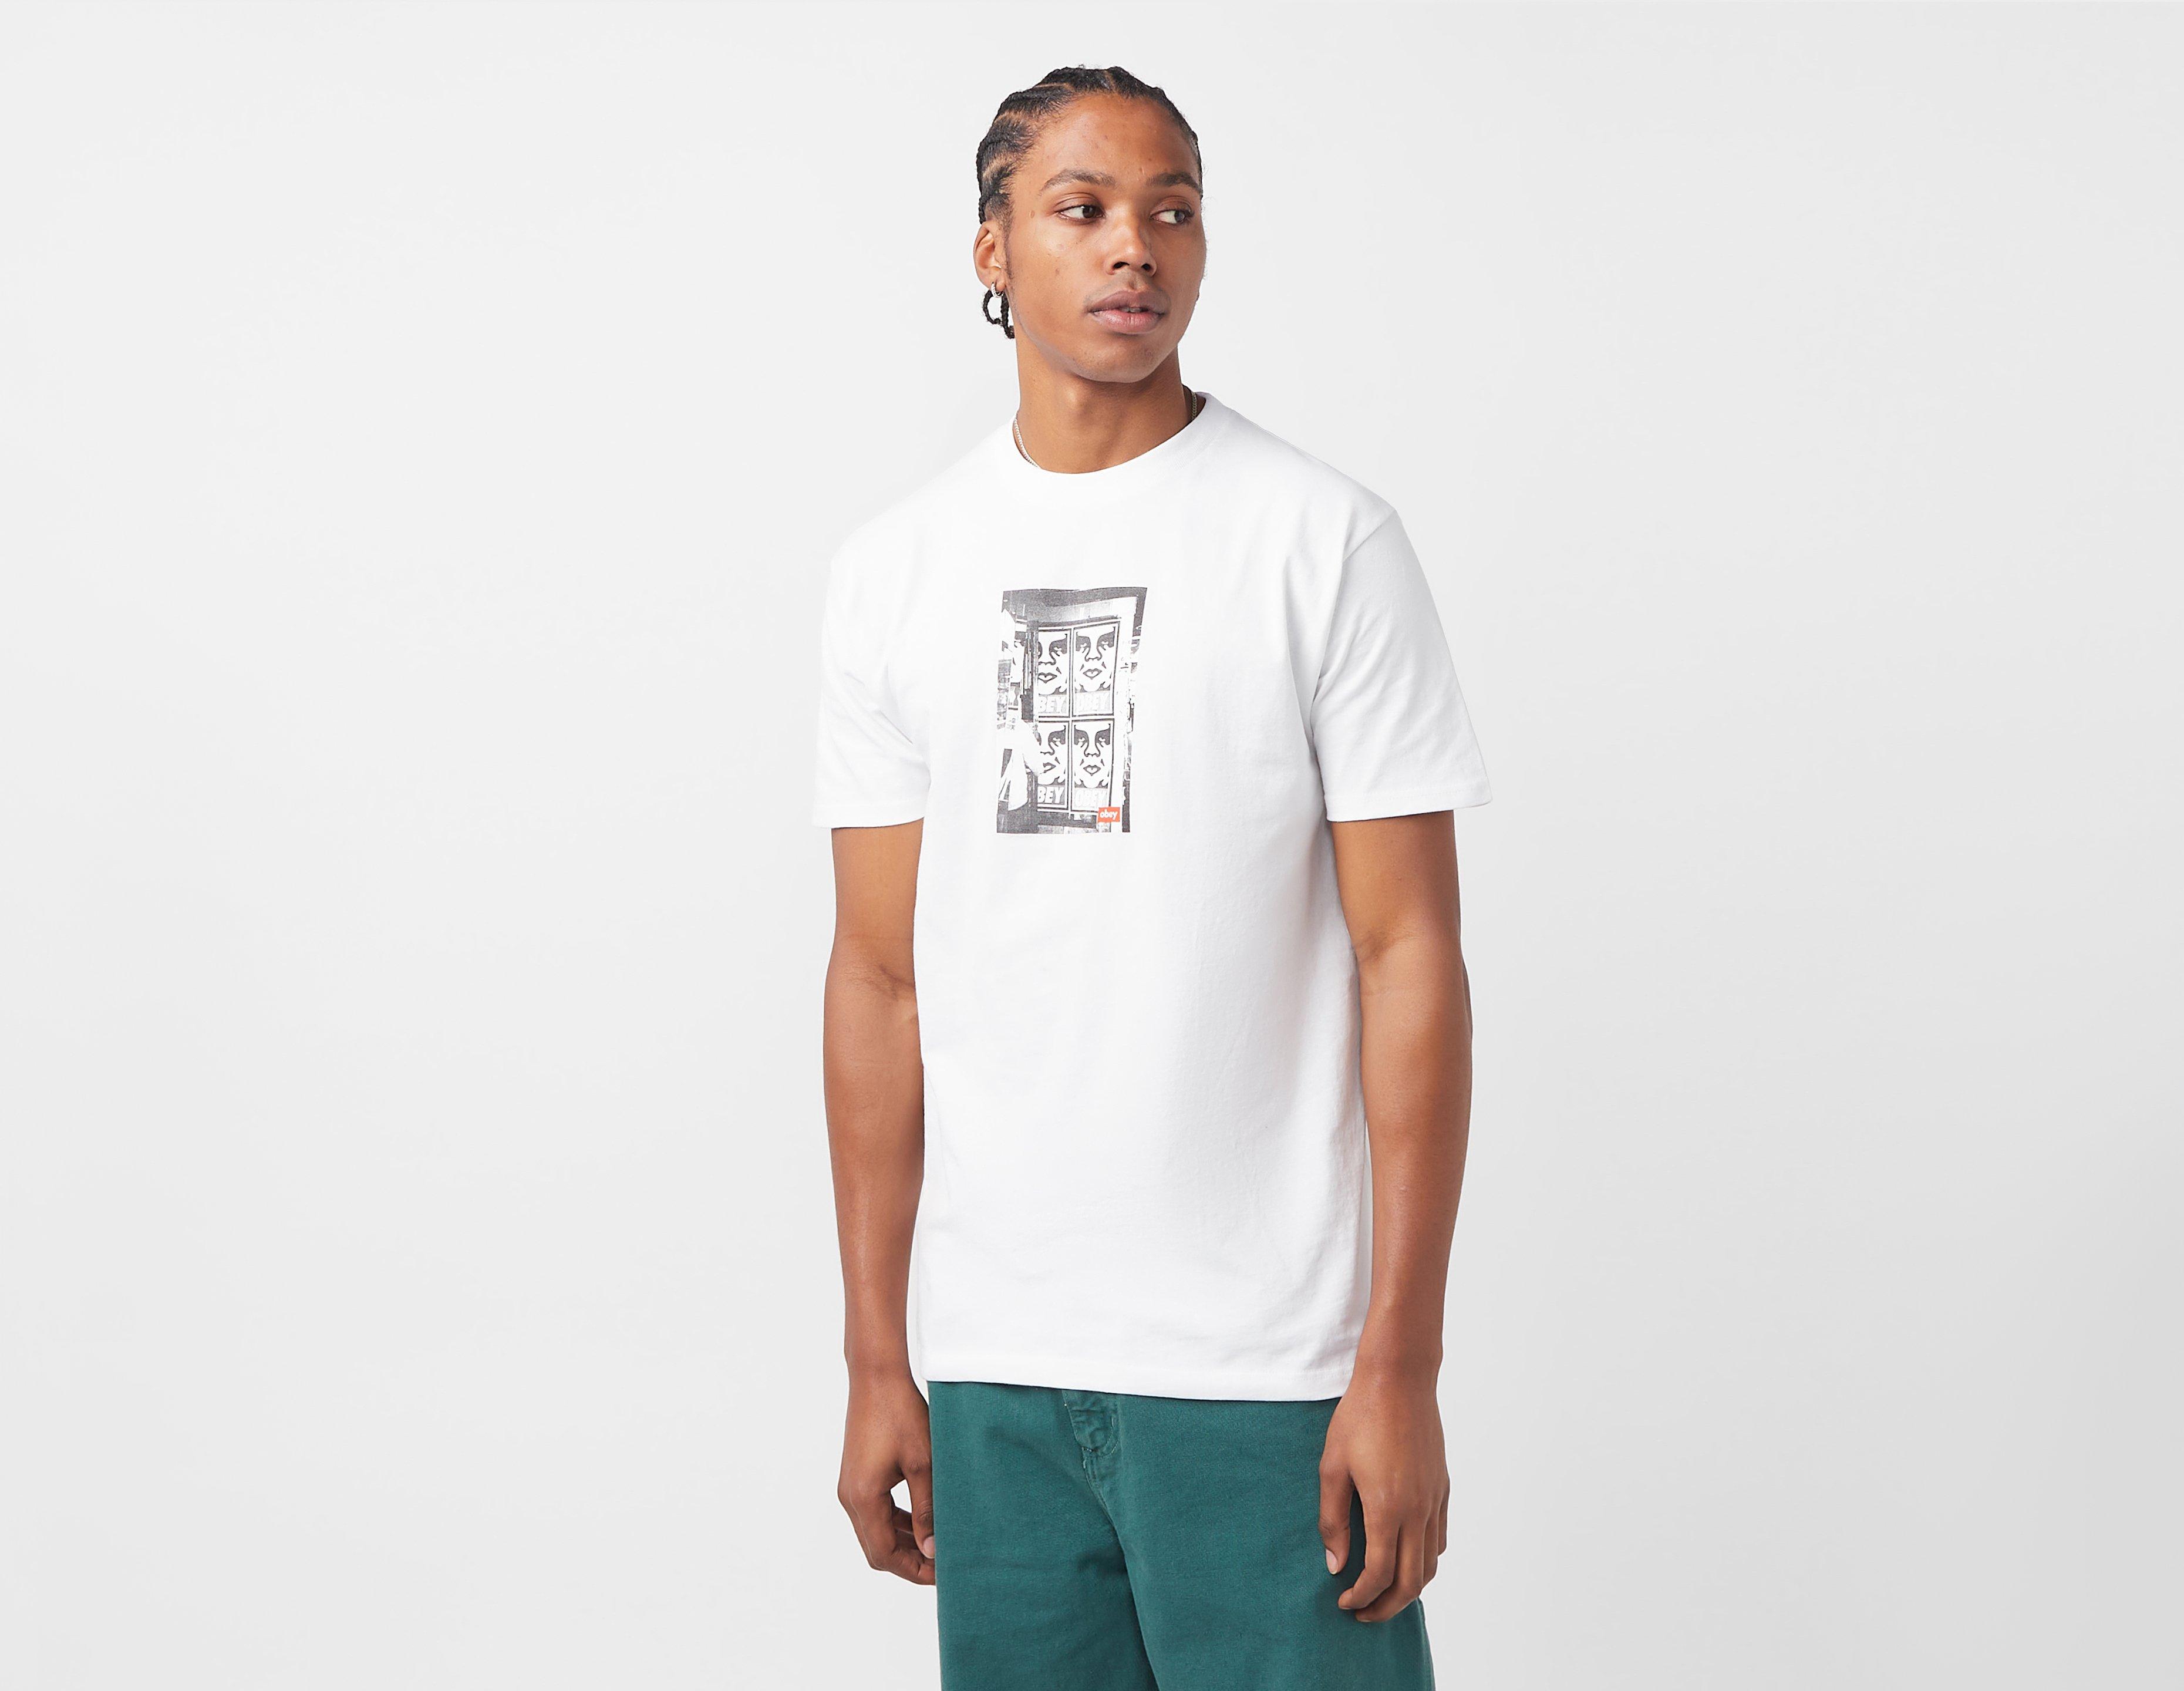 - Shirt short-sleeved Healthdesign? Obey T Rot T-shirt - White Icon Photo |